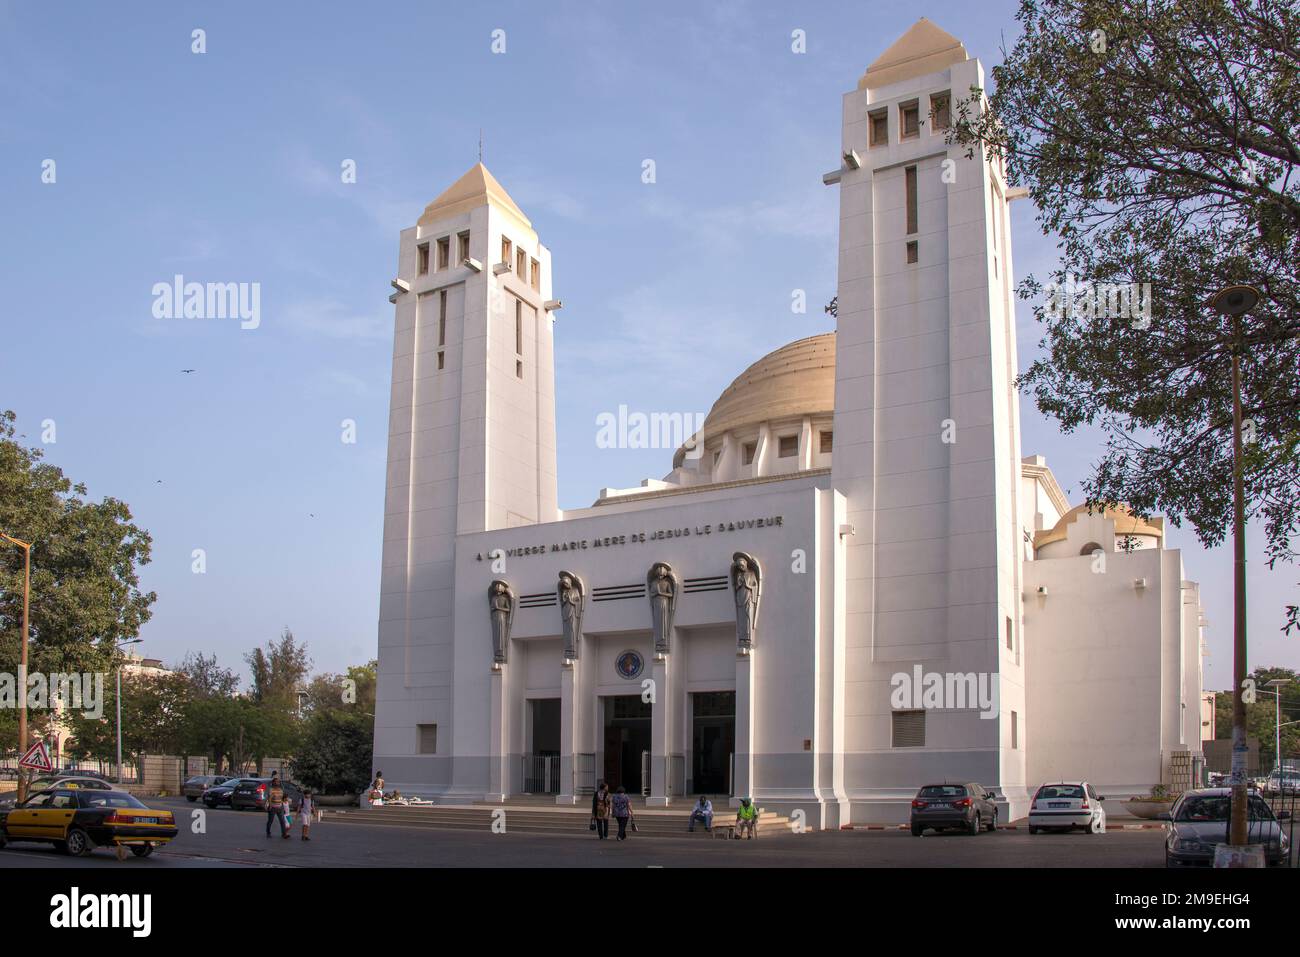 Cathedral of Our Lady of Victories in the city of Dakar, the capital of Senegal Stock Photo